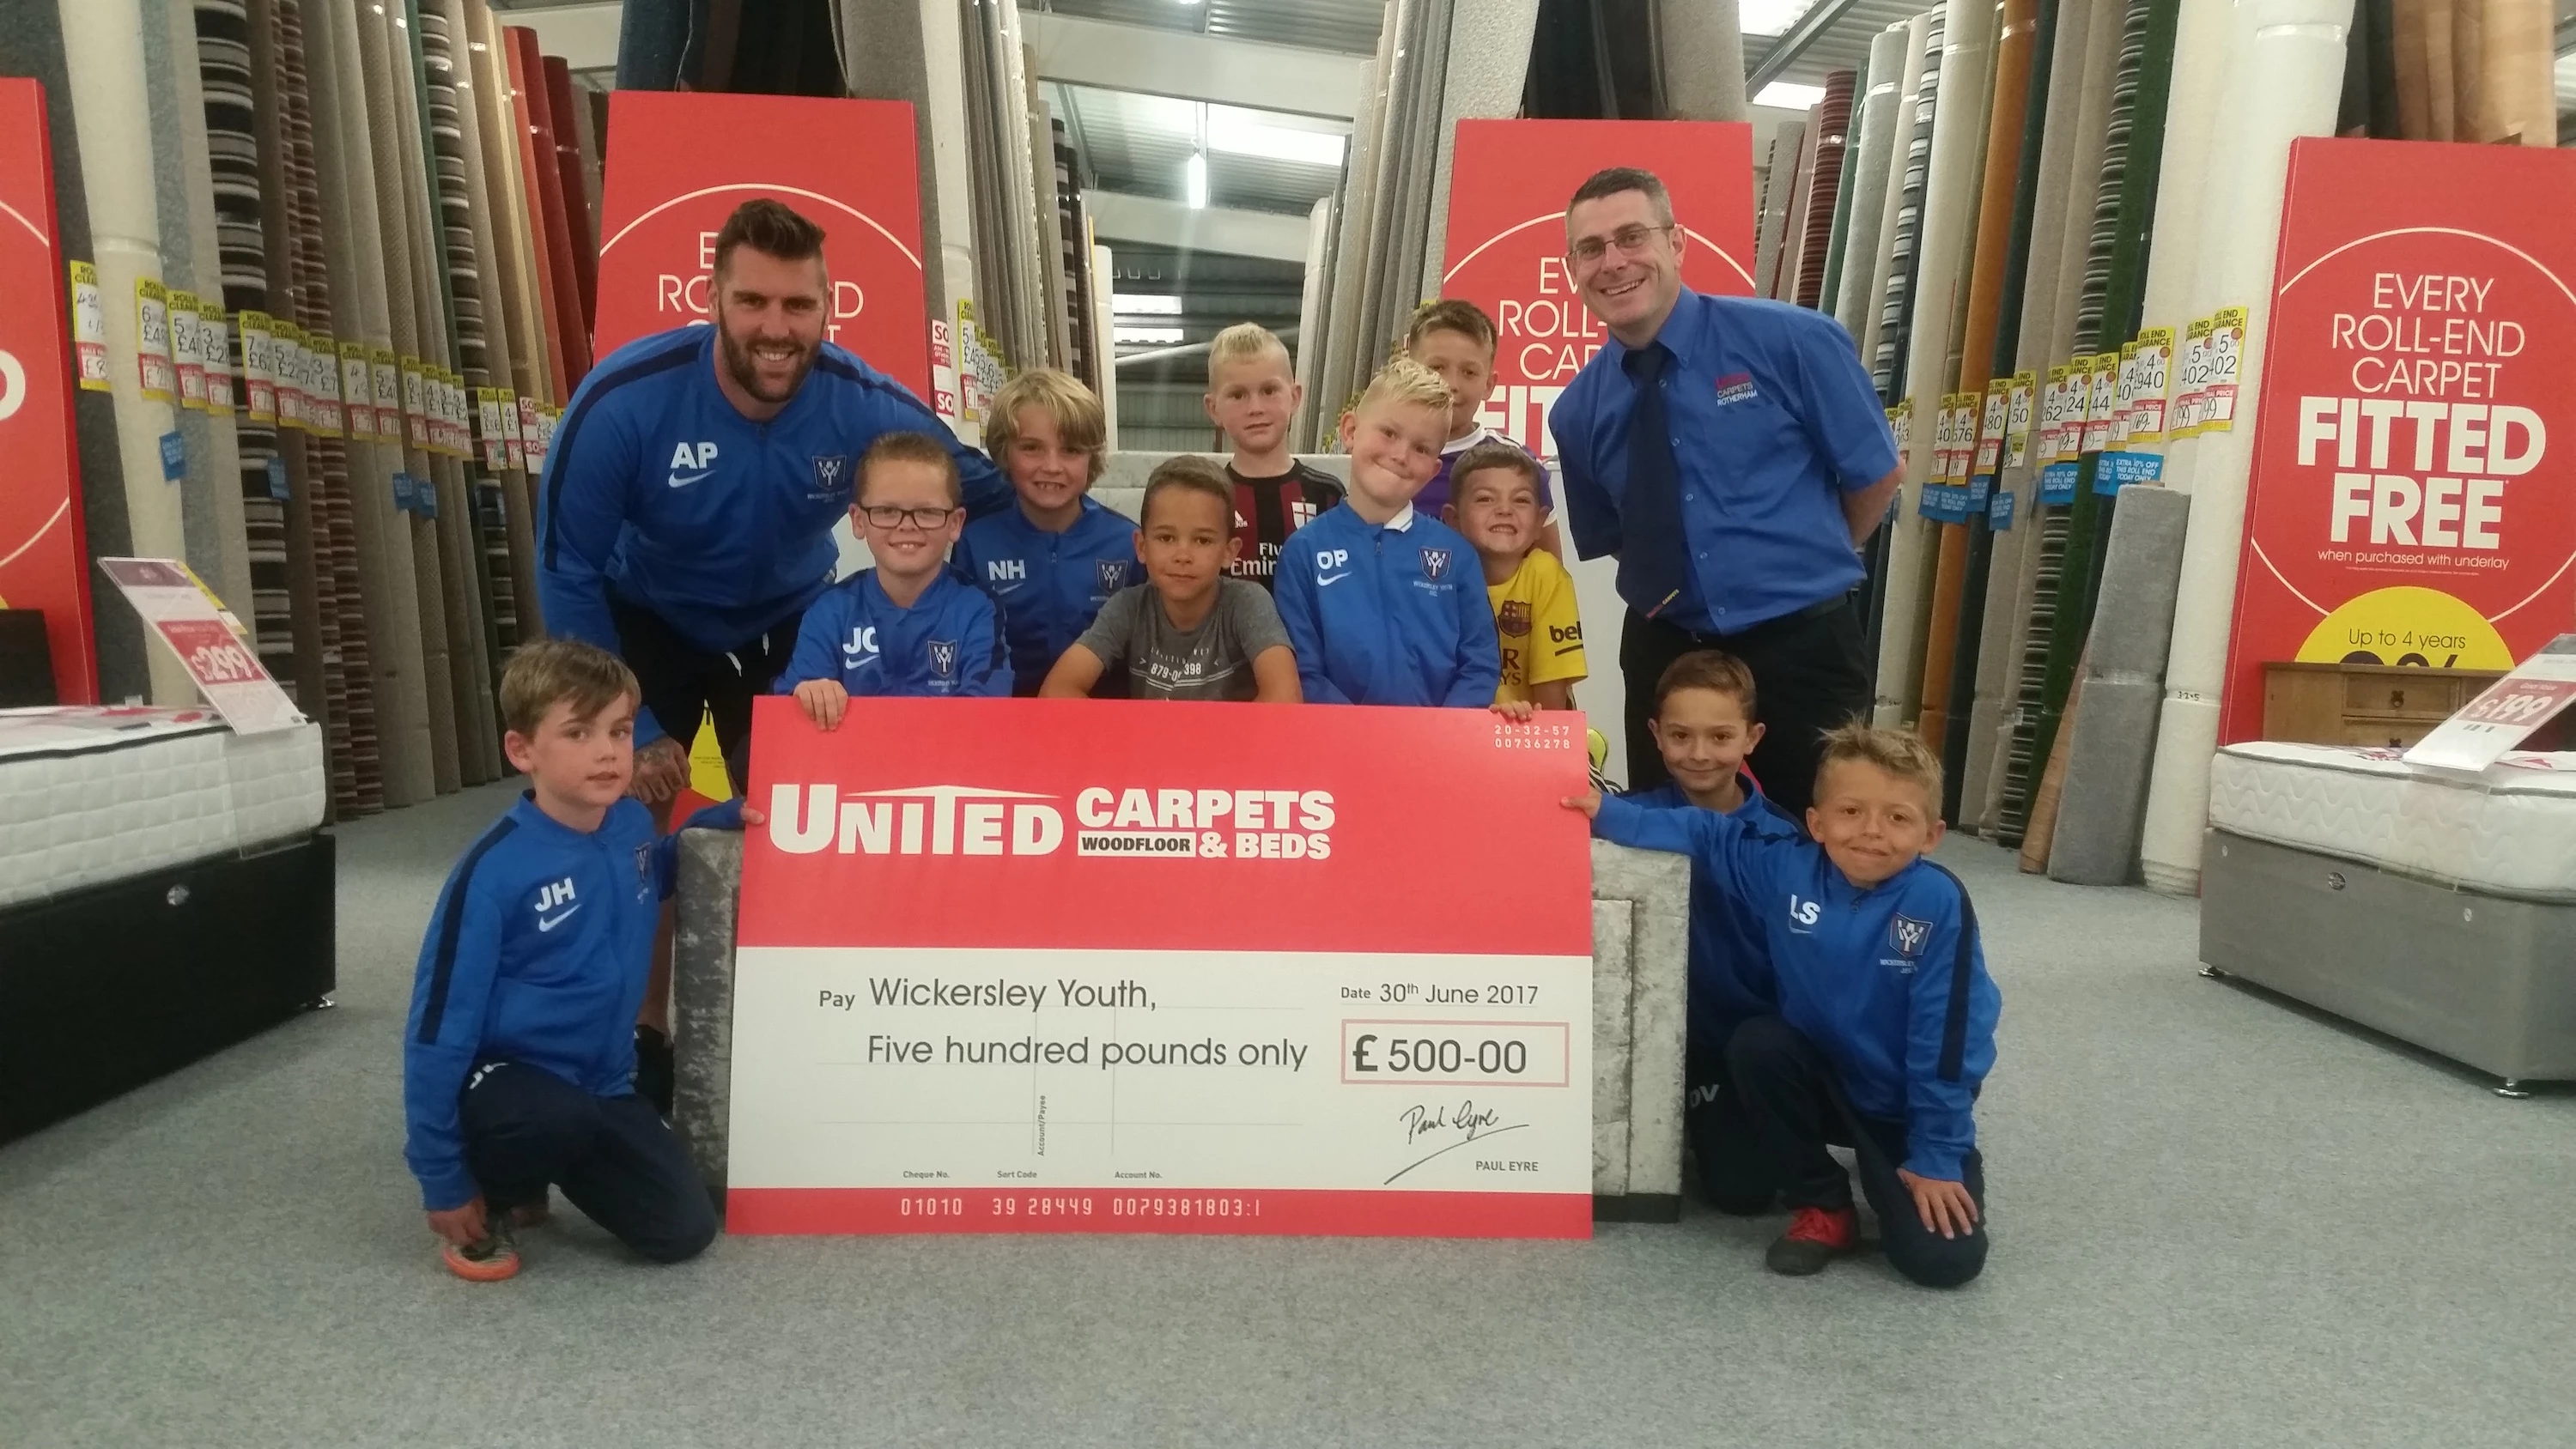 L-R Alex Pearman (Wickersley Under 8s Coach), the team and Jason Swift (Rotherham United Carpets & Beds store manager)